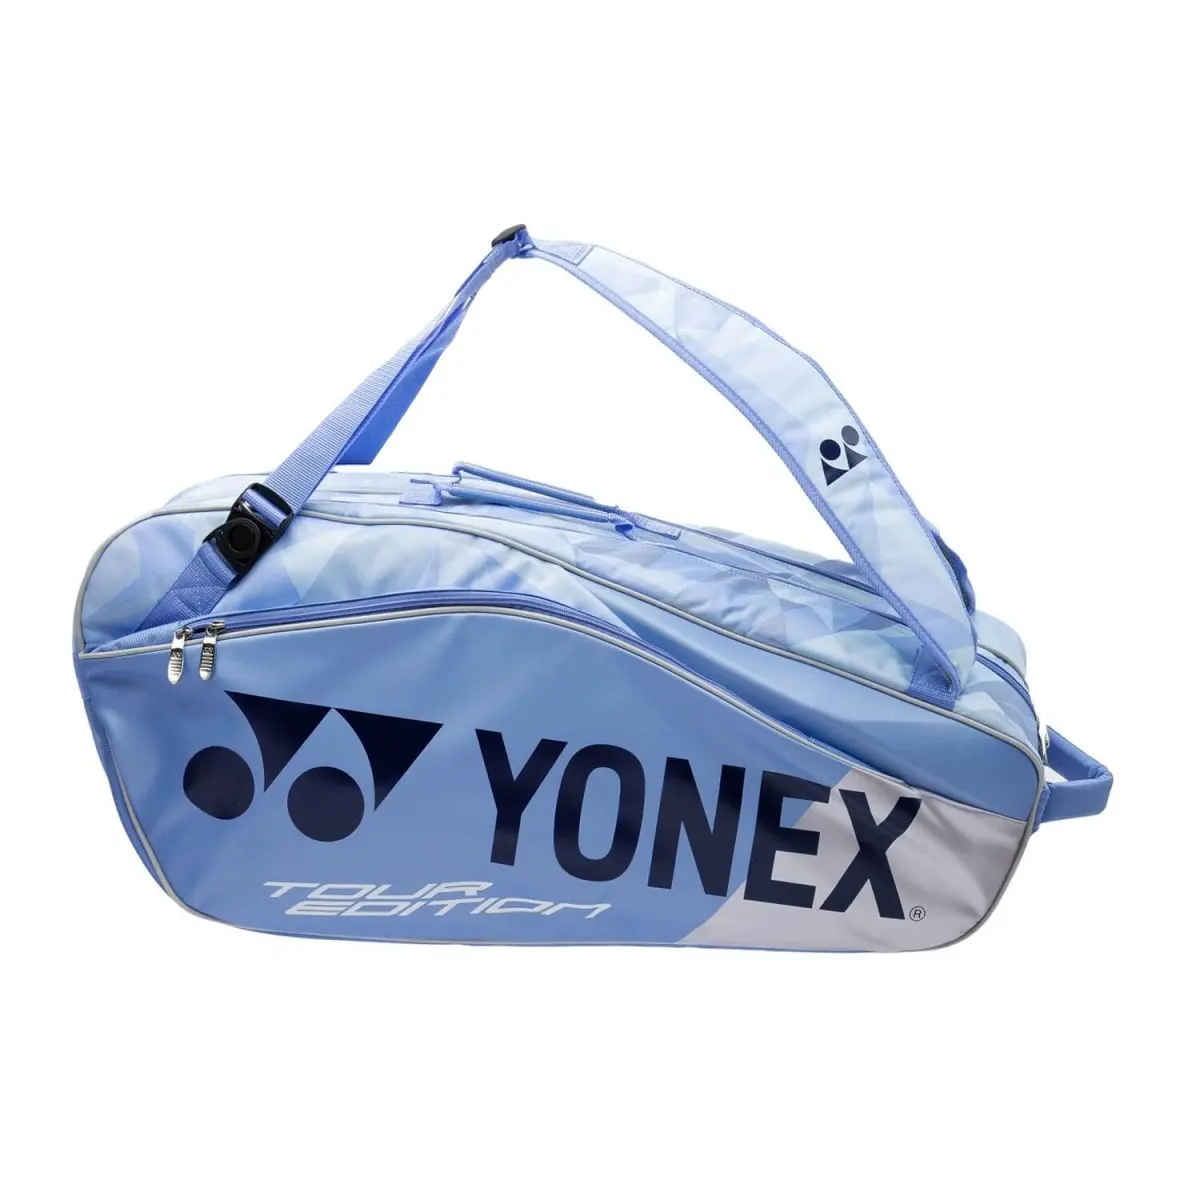 Victor Badminton Bag - Get Best Price from Manufacturers & Suppliers in  India